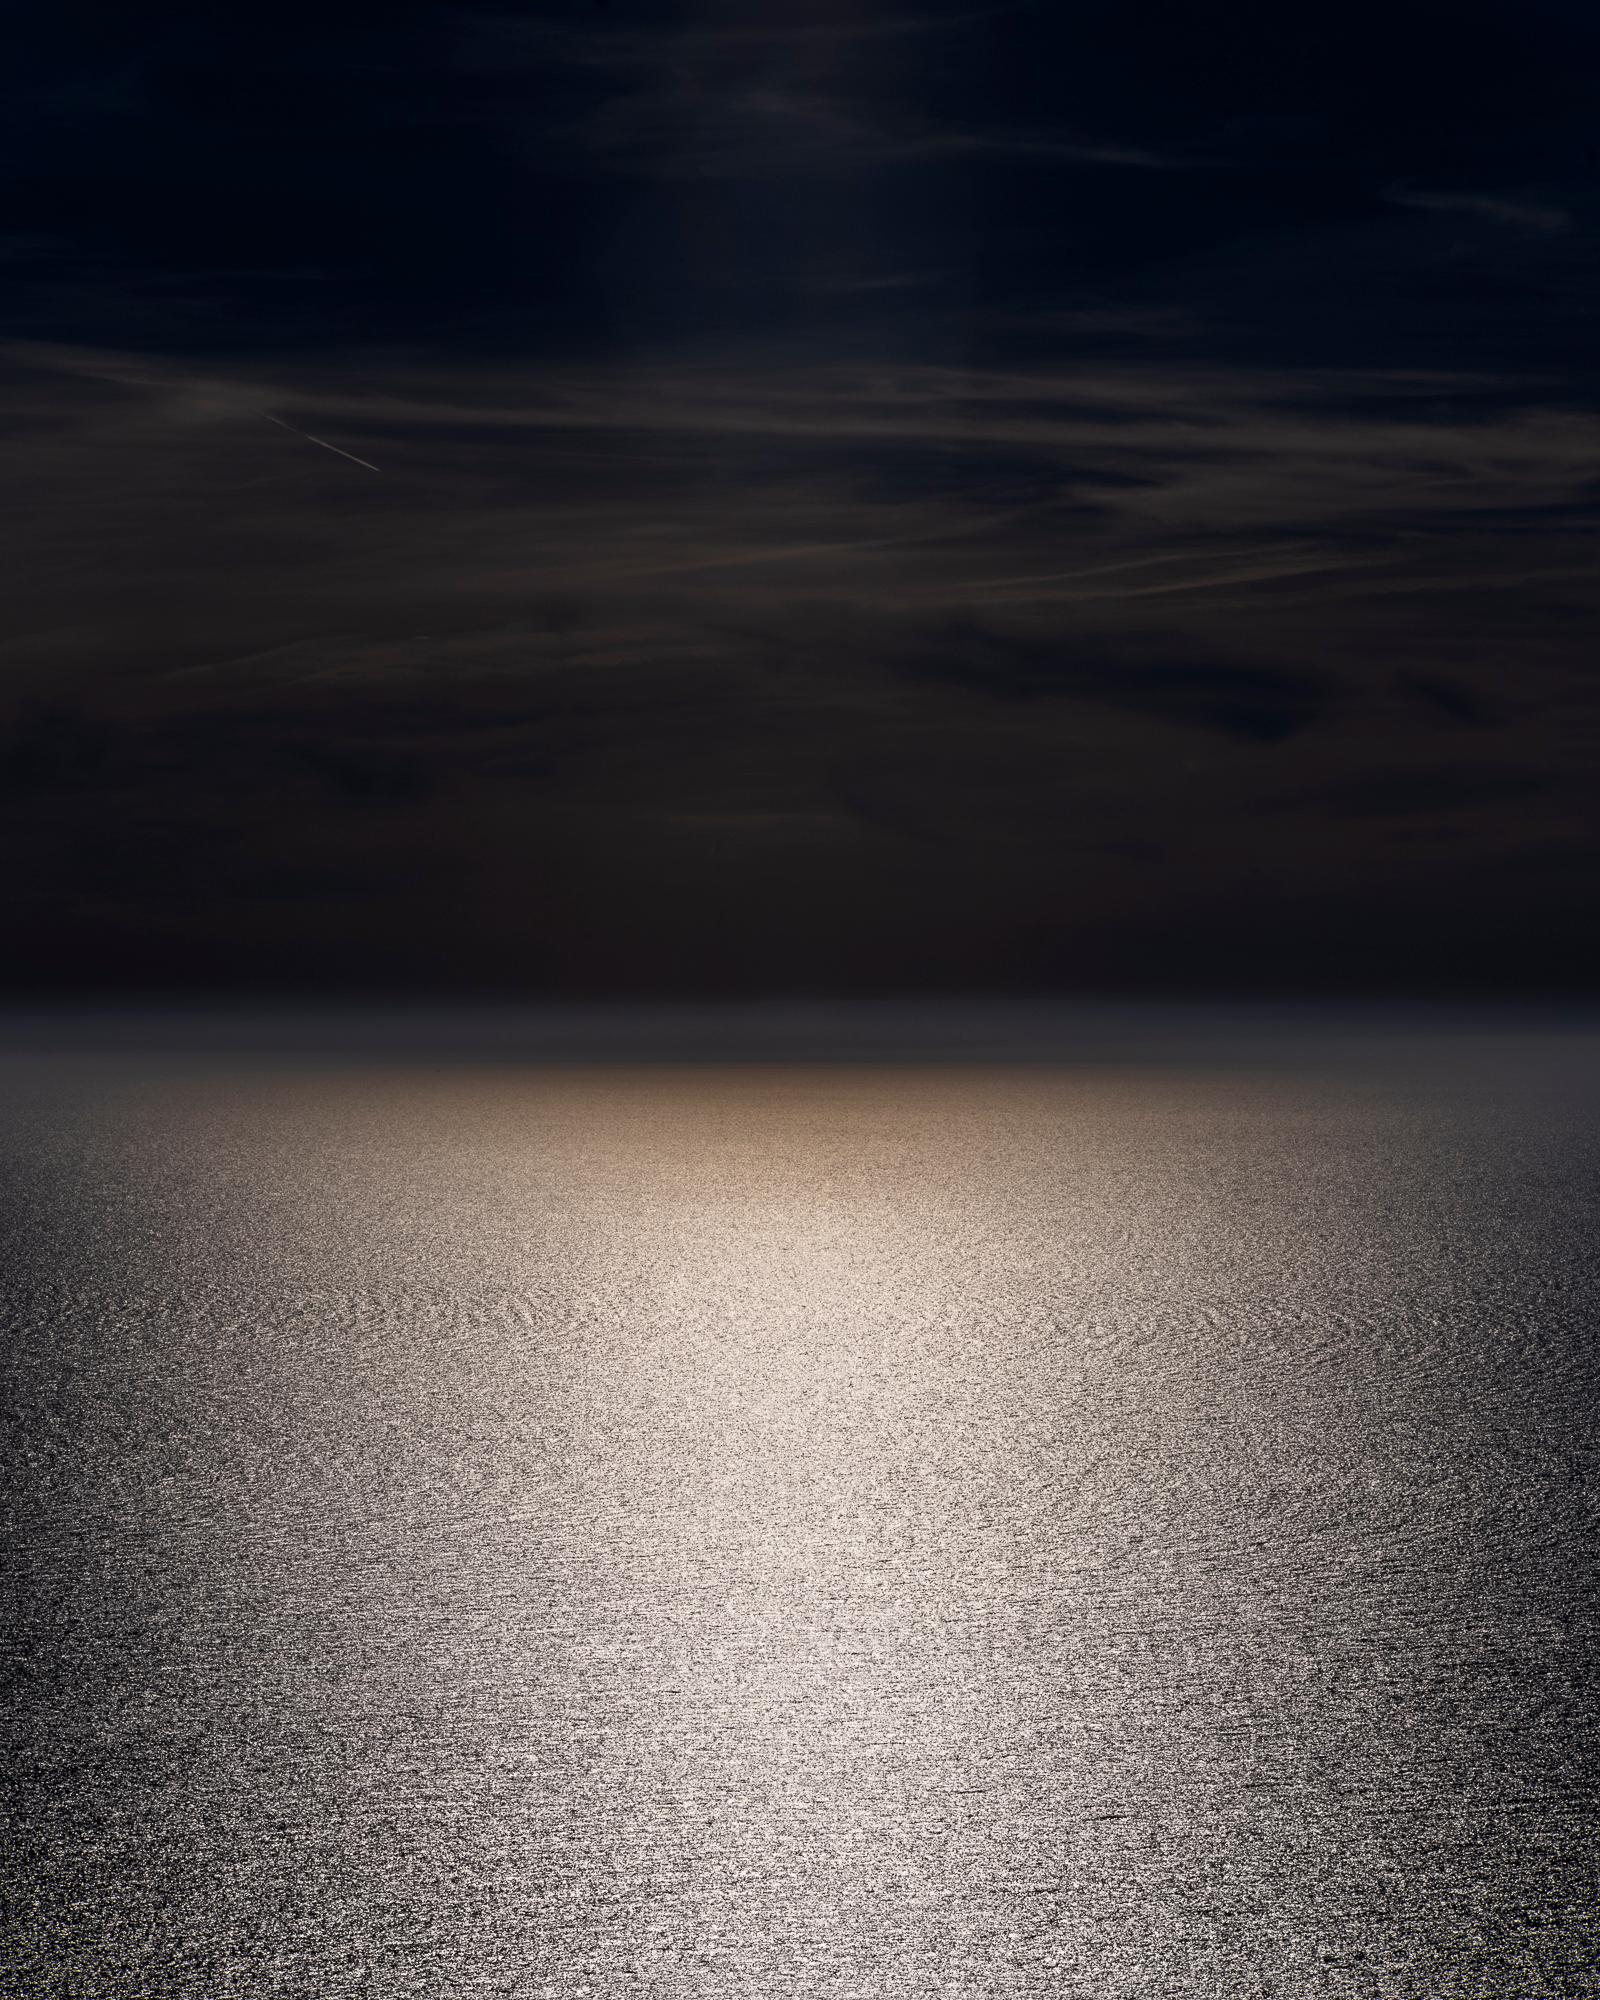 Set Sol de Mallorca, Moonrise II, I and IV. From the Series Mares.  - Photograph by Miguel Winograd 